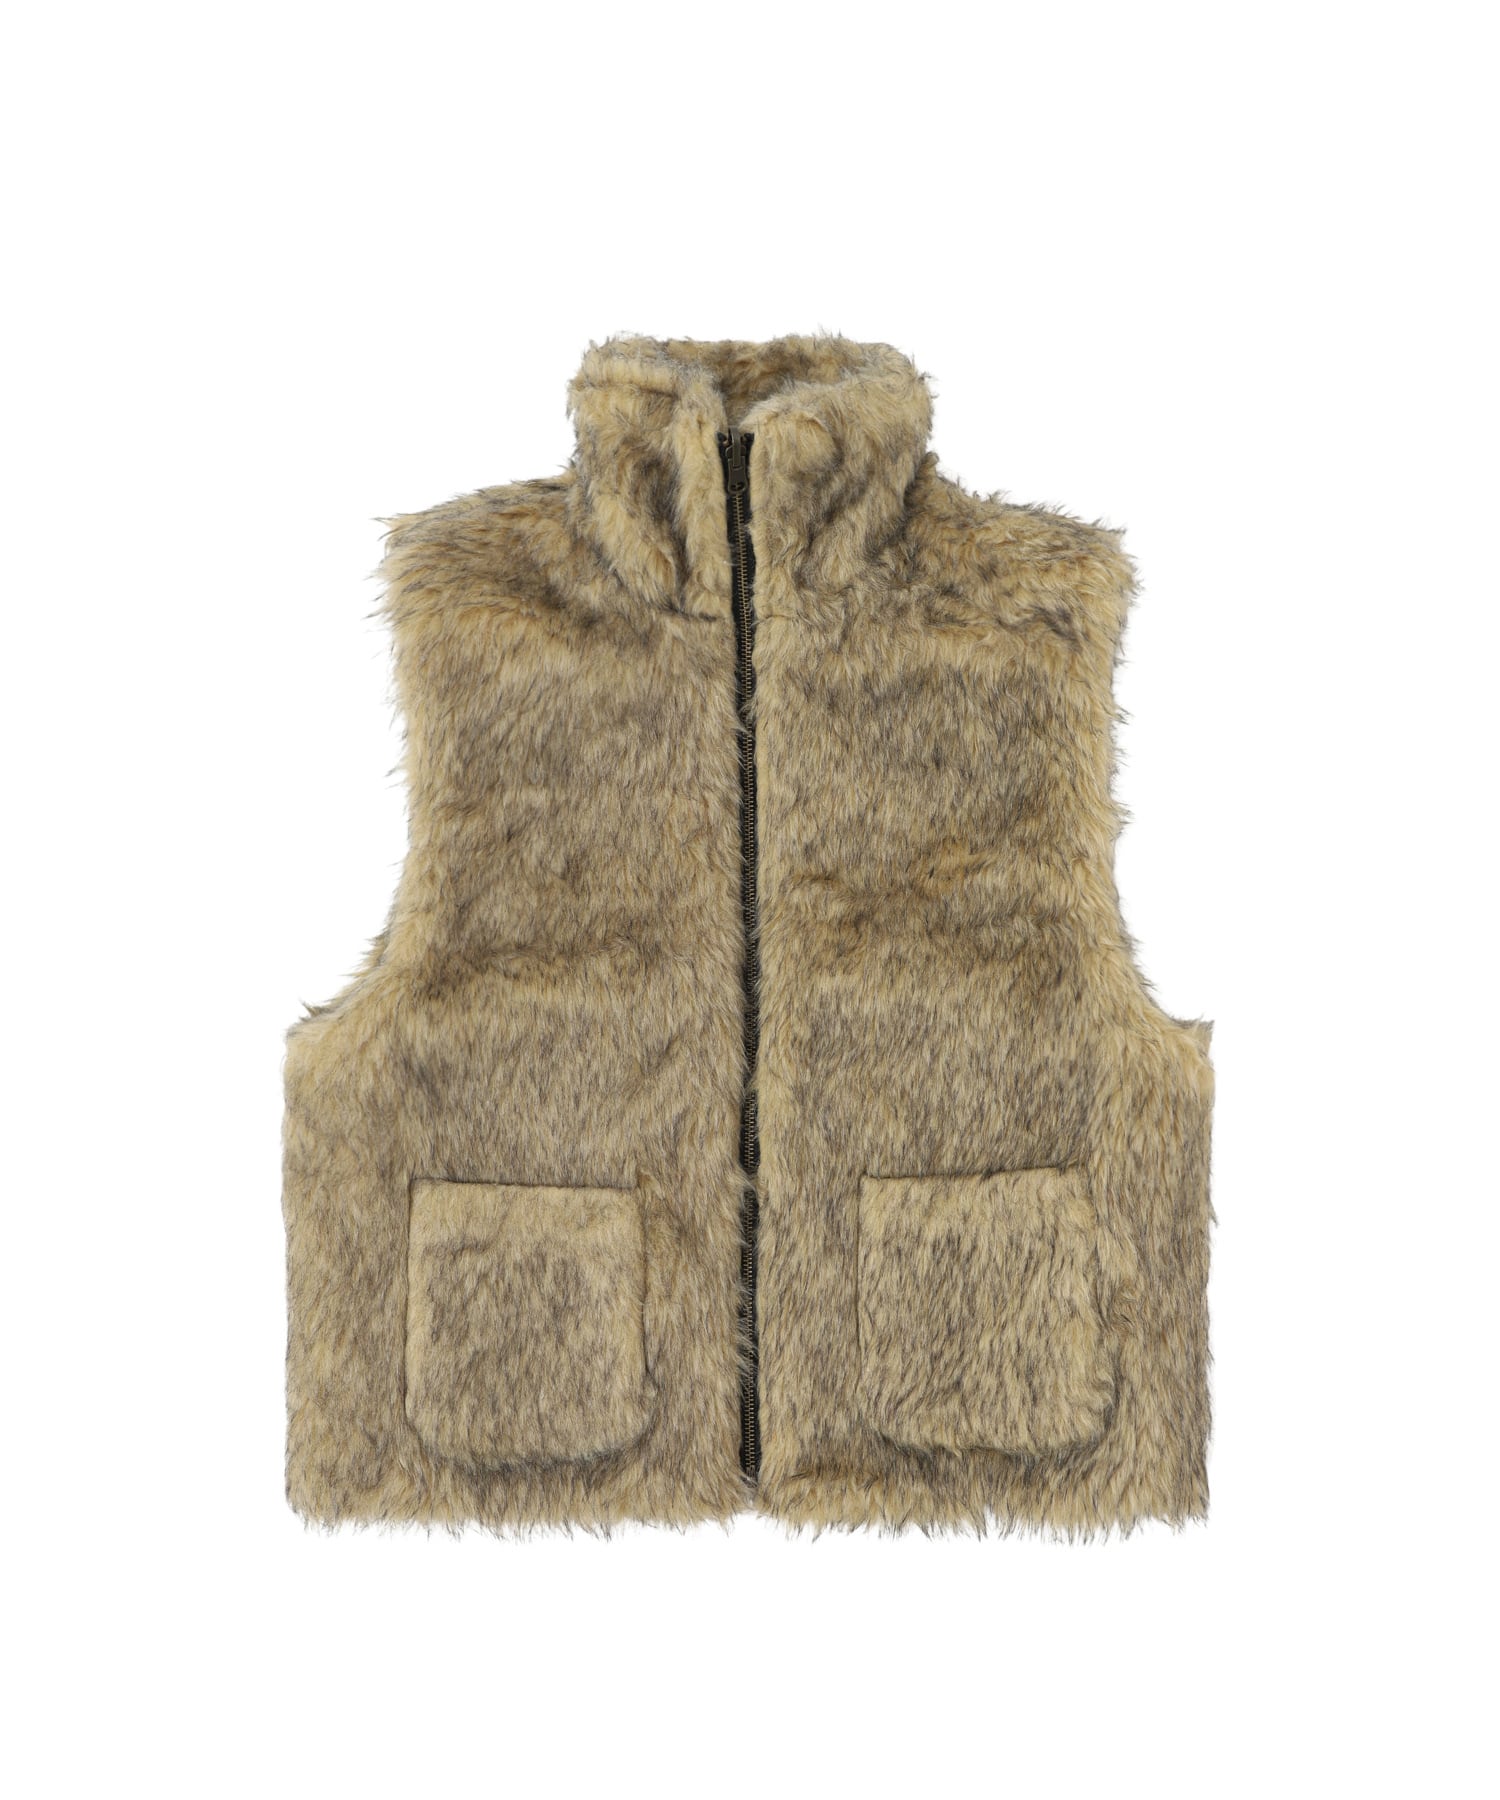 ACLENT 2way stand collar fur vest - アウター